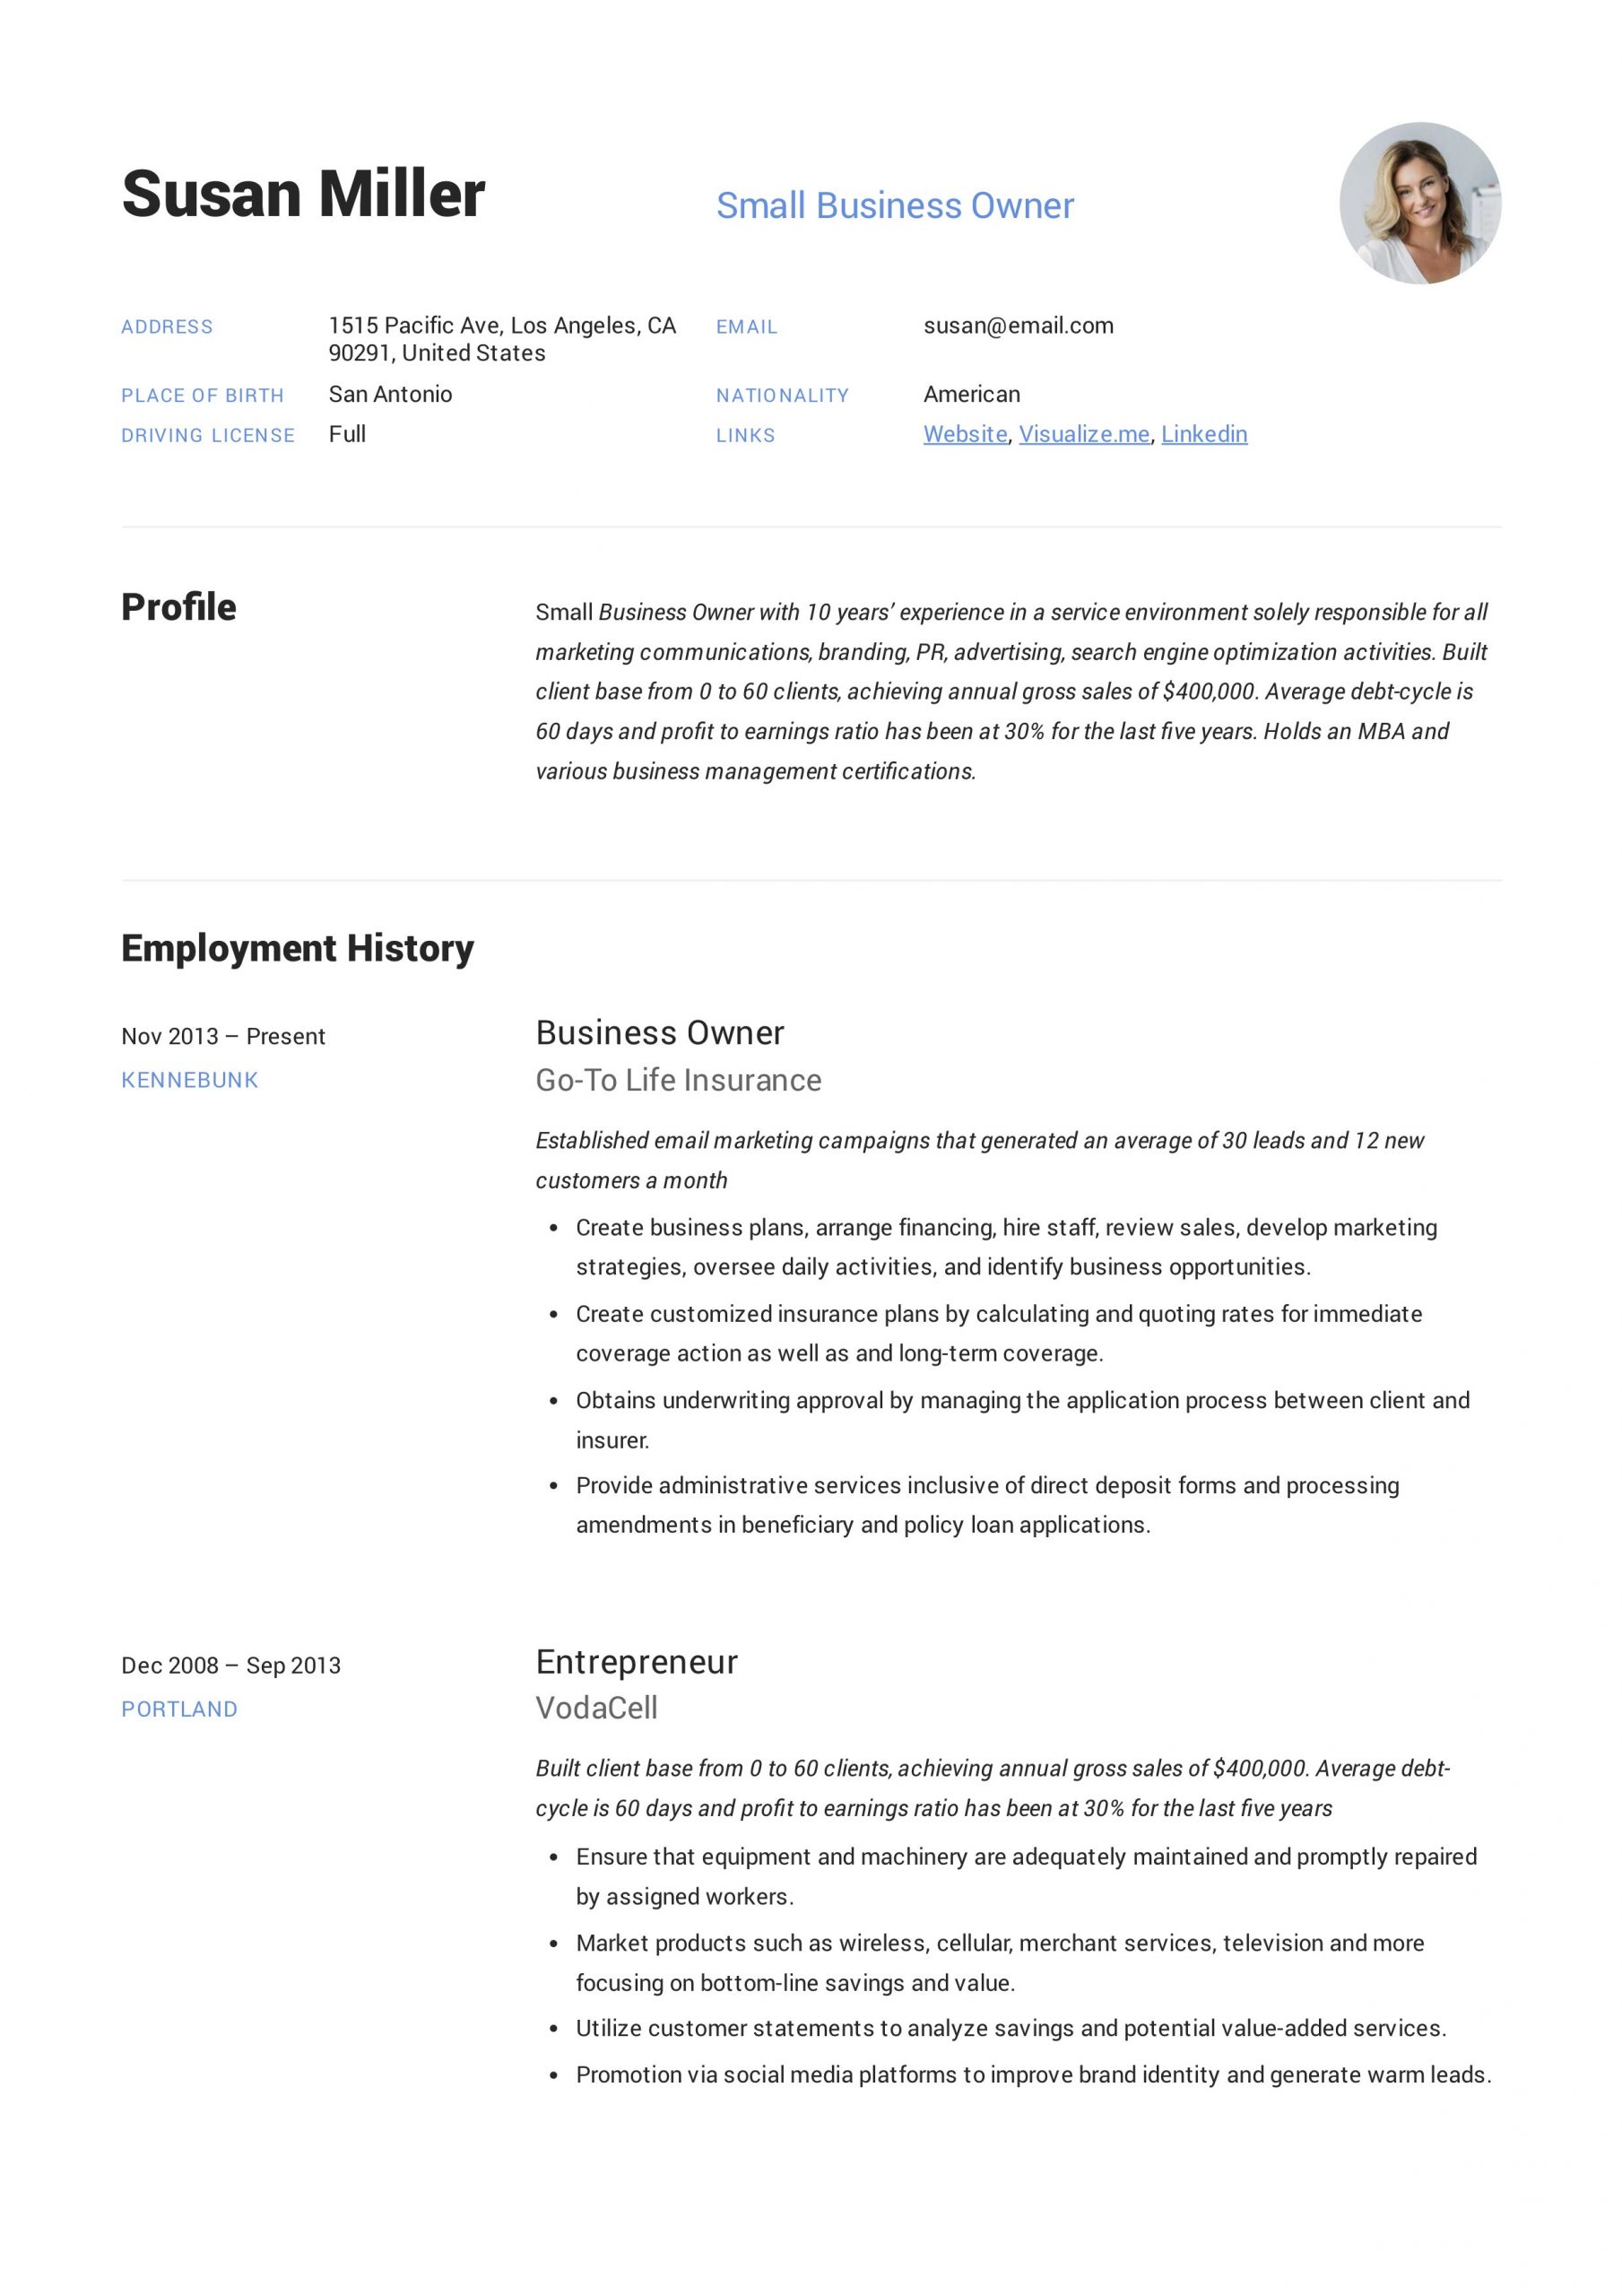 Resume Template for Small Business Owner Small Business Owner Resume Guide  19 Examples Pdf 2020